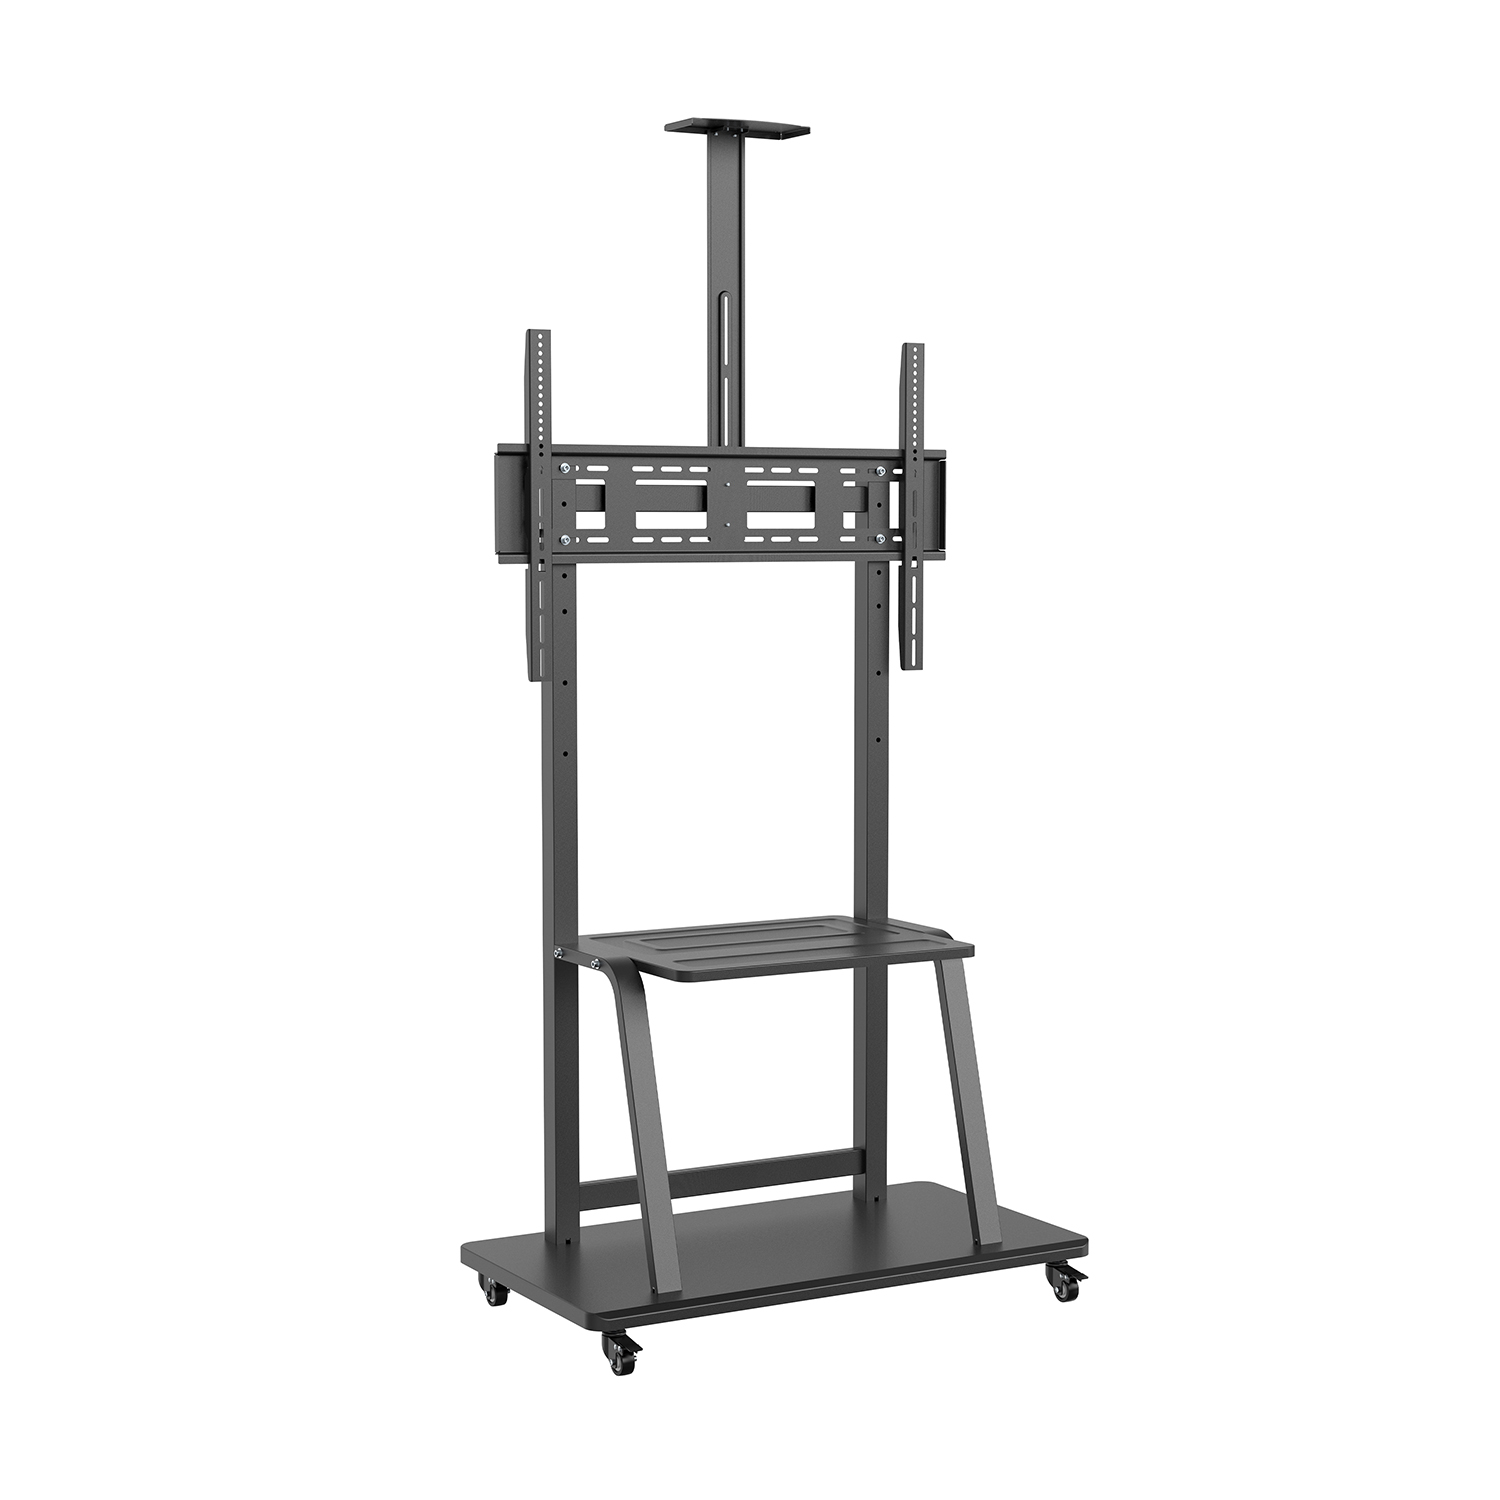 Aisens Eco Floor Stand With Wheel - Dvd Tray And Camera Support for Monitor/TV 150Kg From 37-100 - Couleur Noir